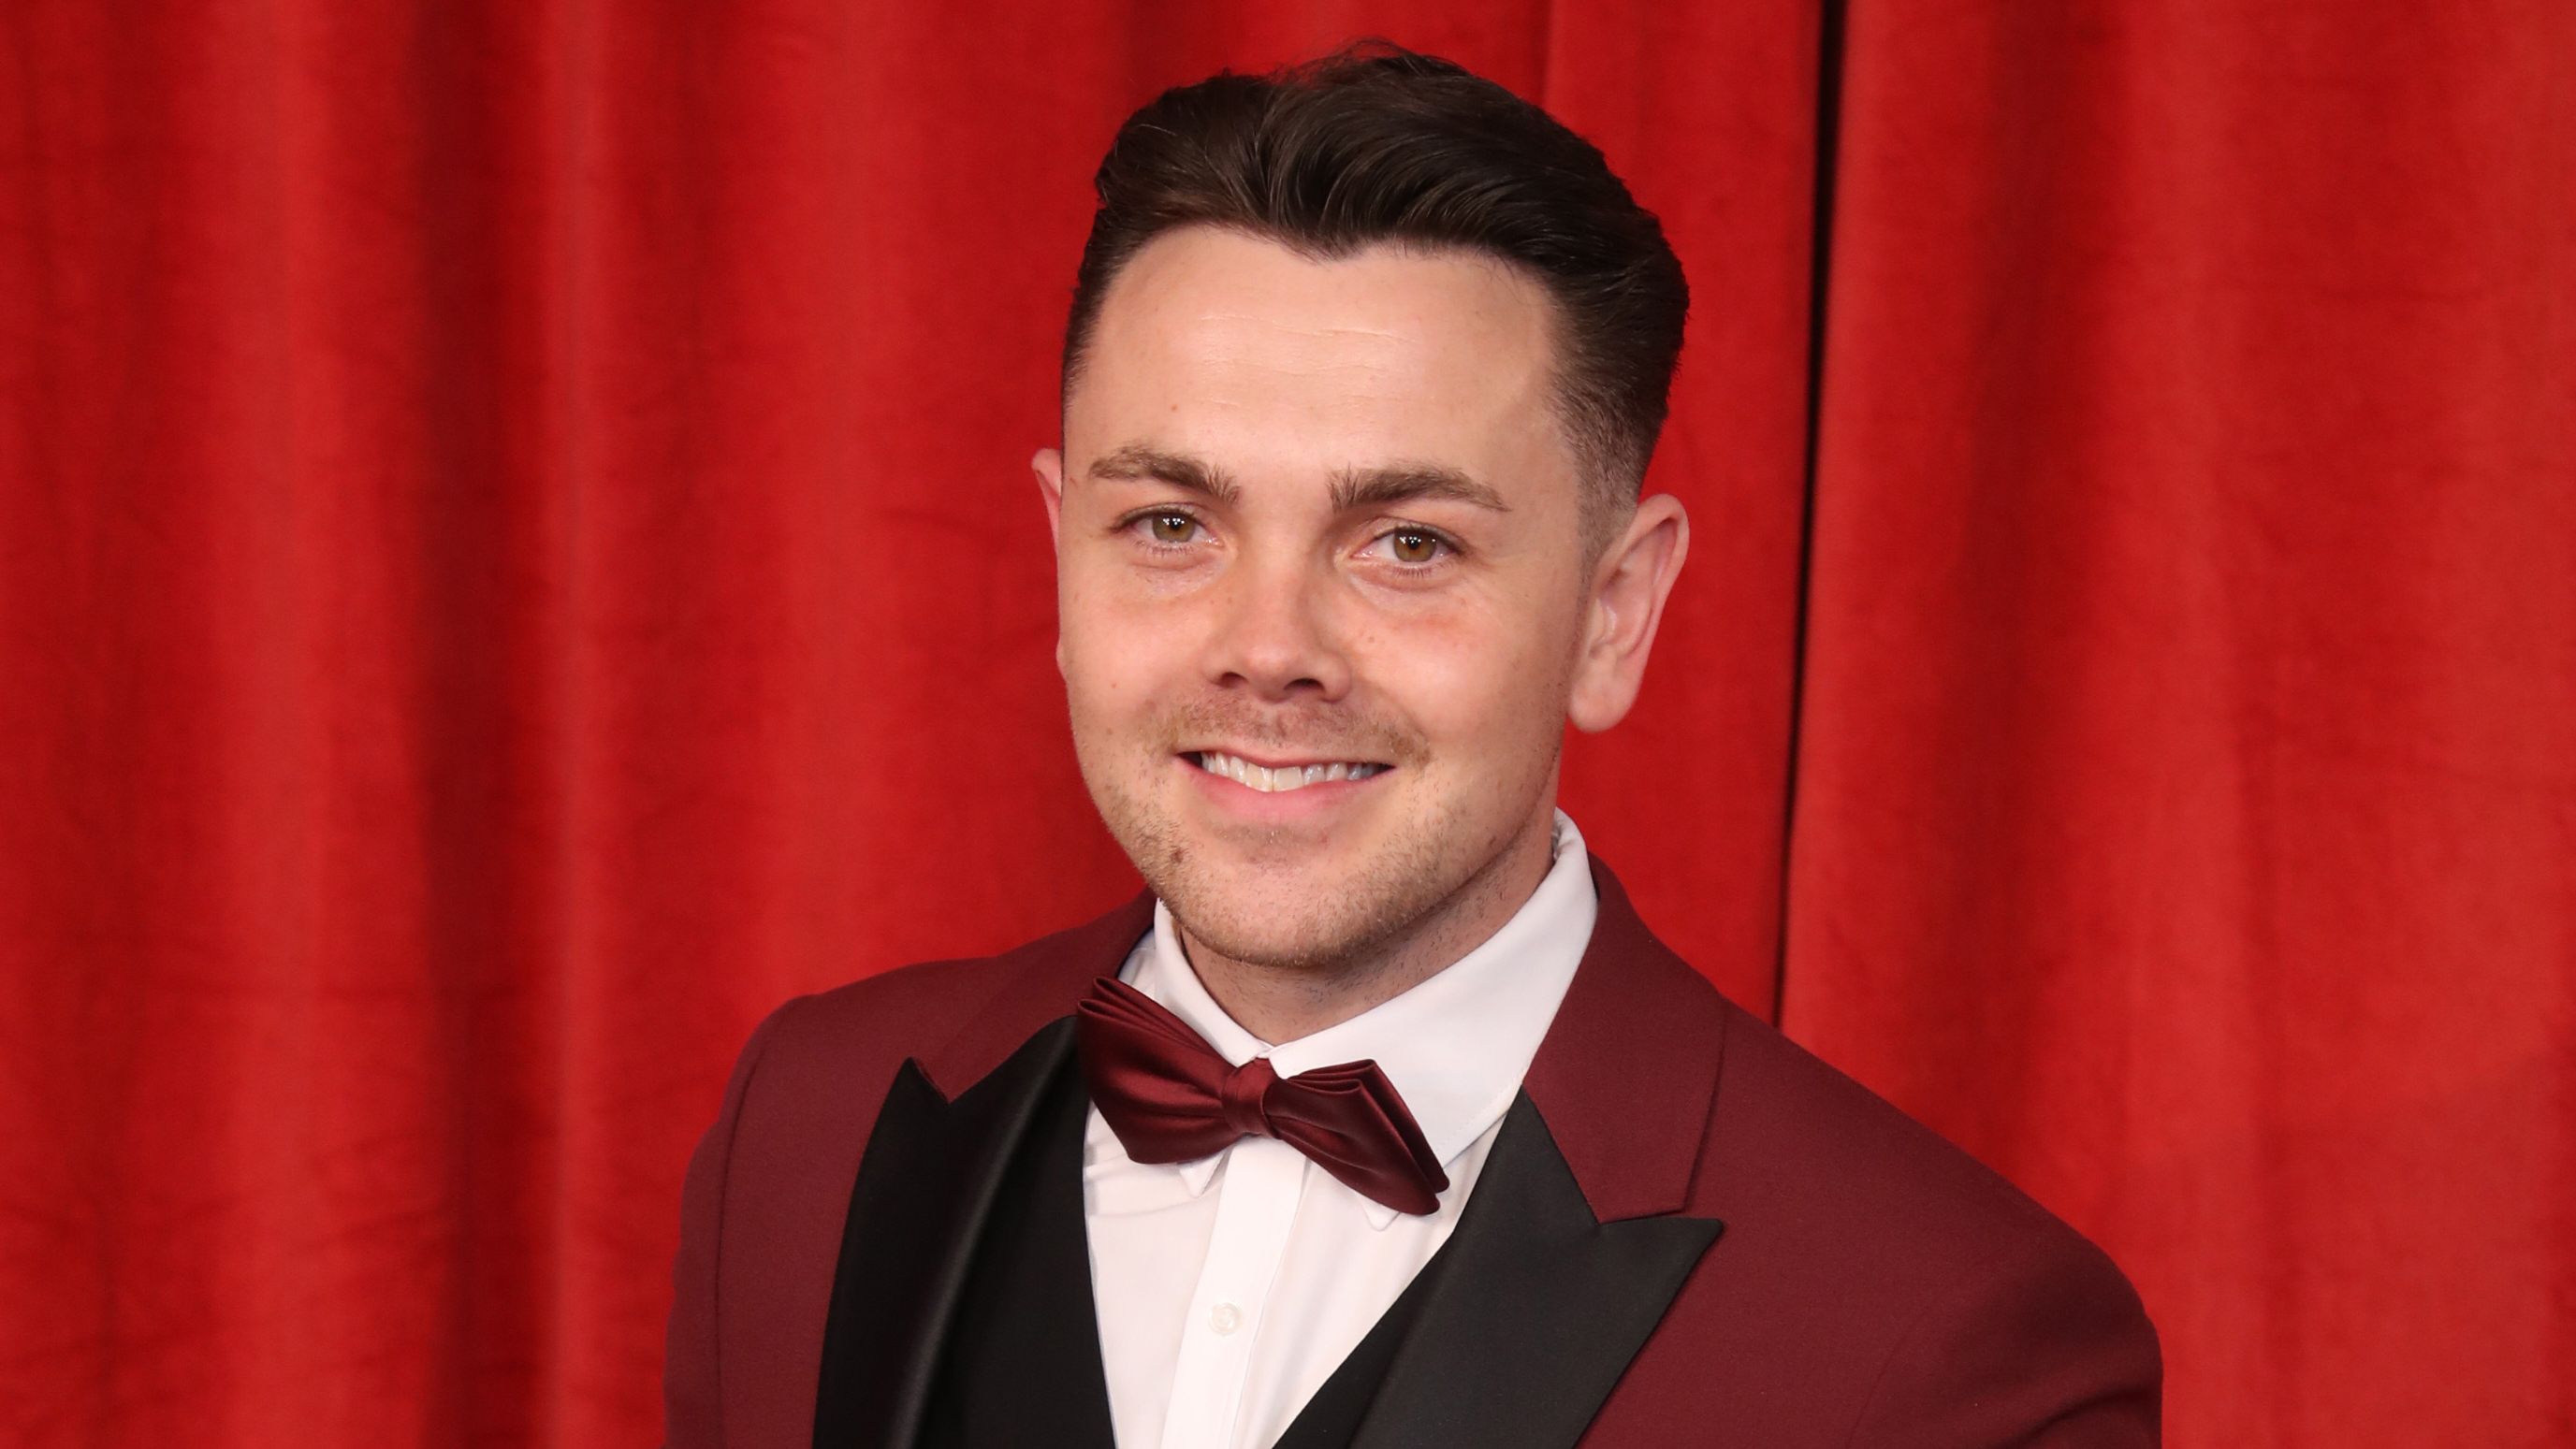 Hollyoaks Actor Ray Quinn Engaged After Proposing To Emily Ashleigh